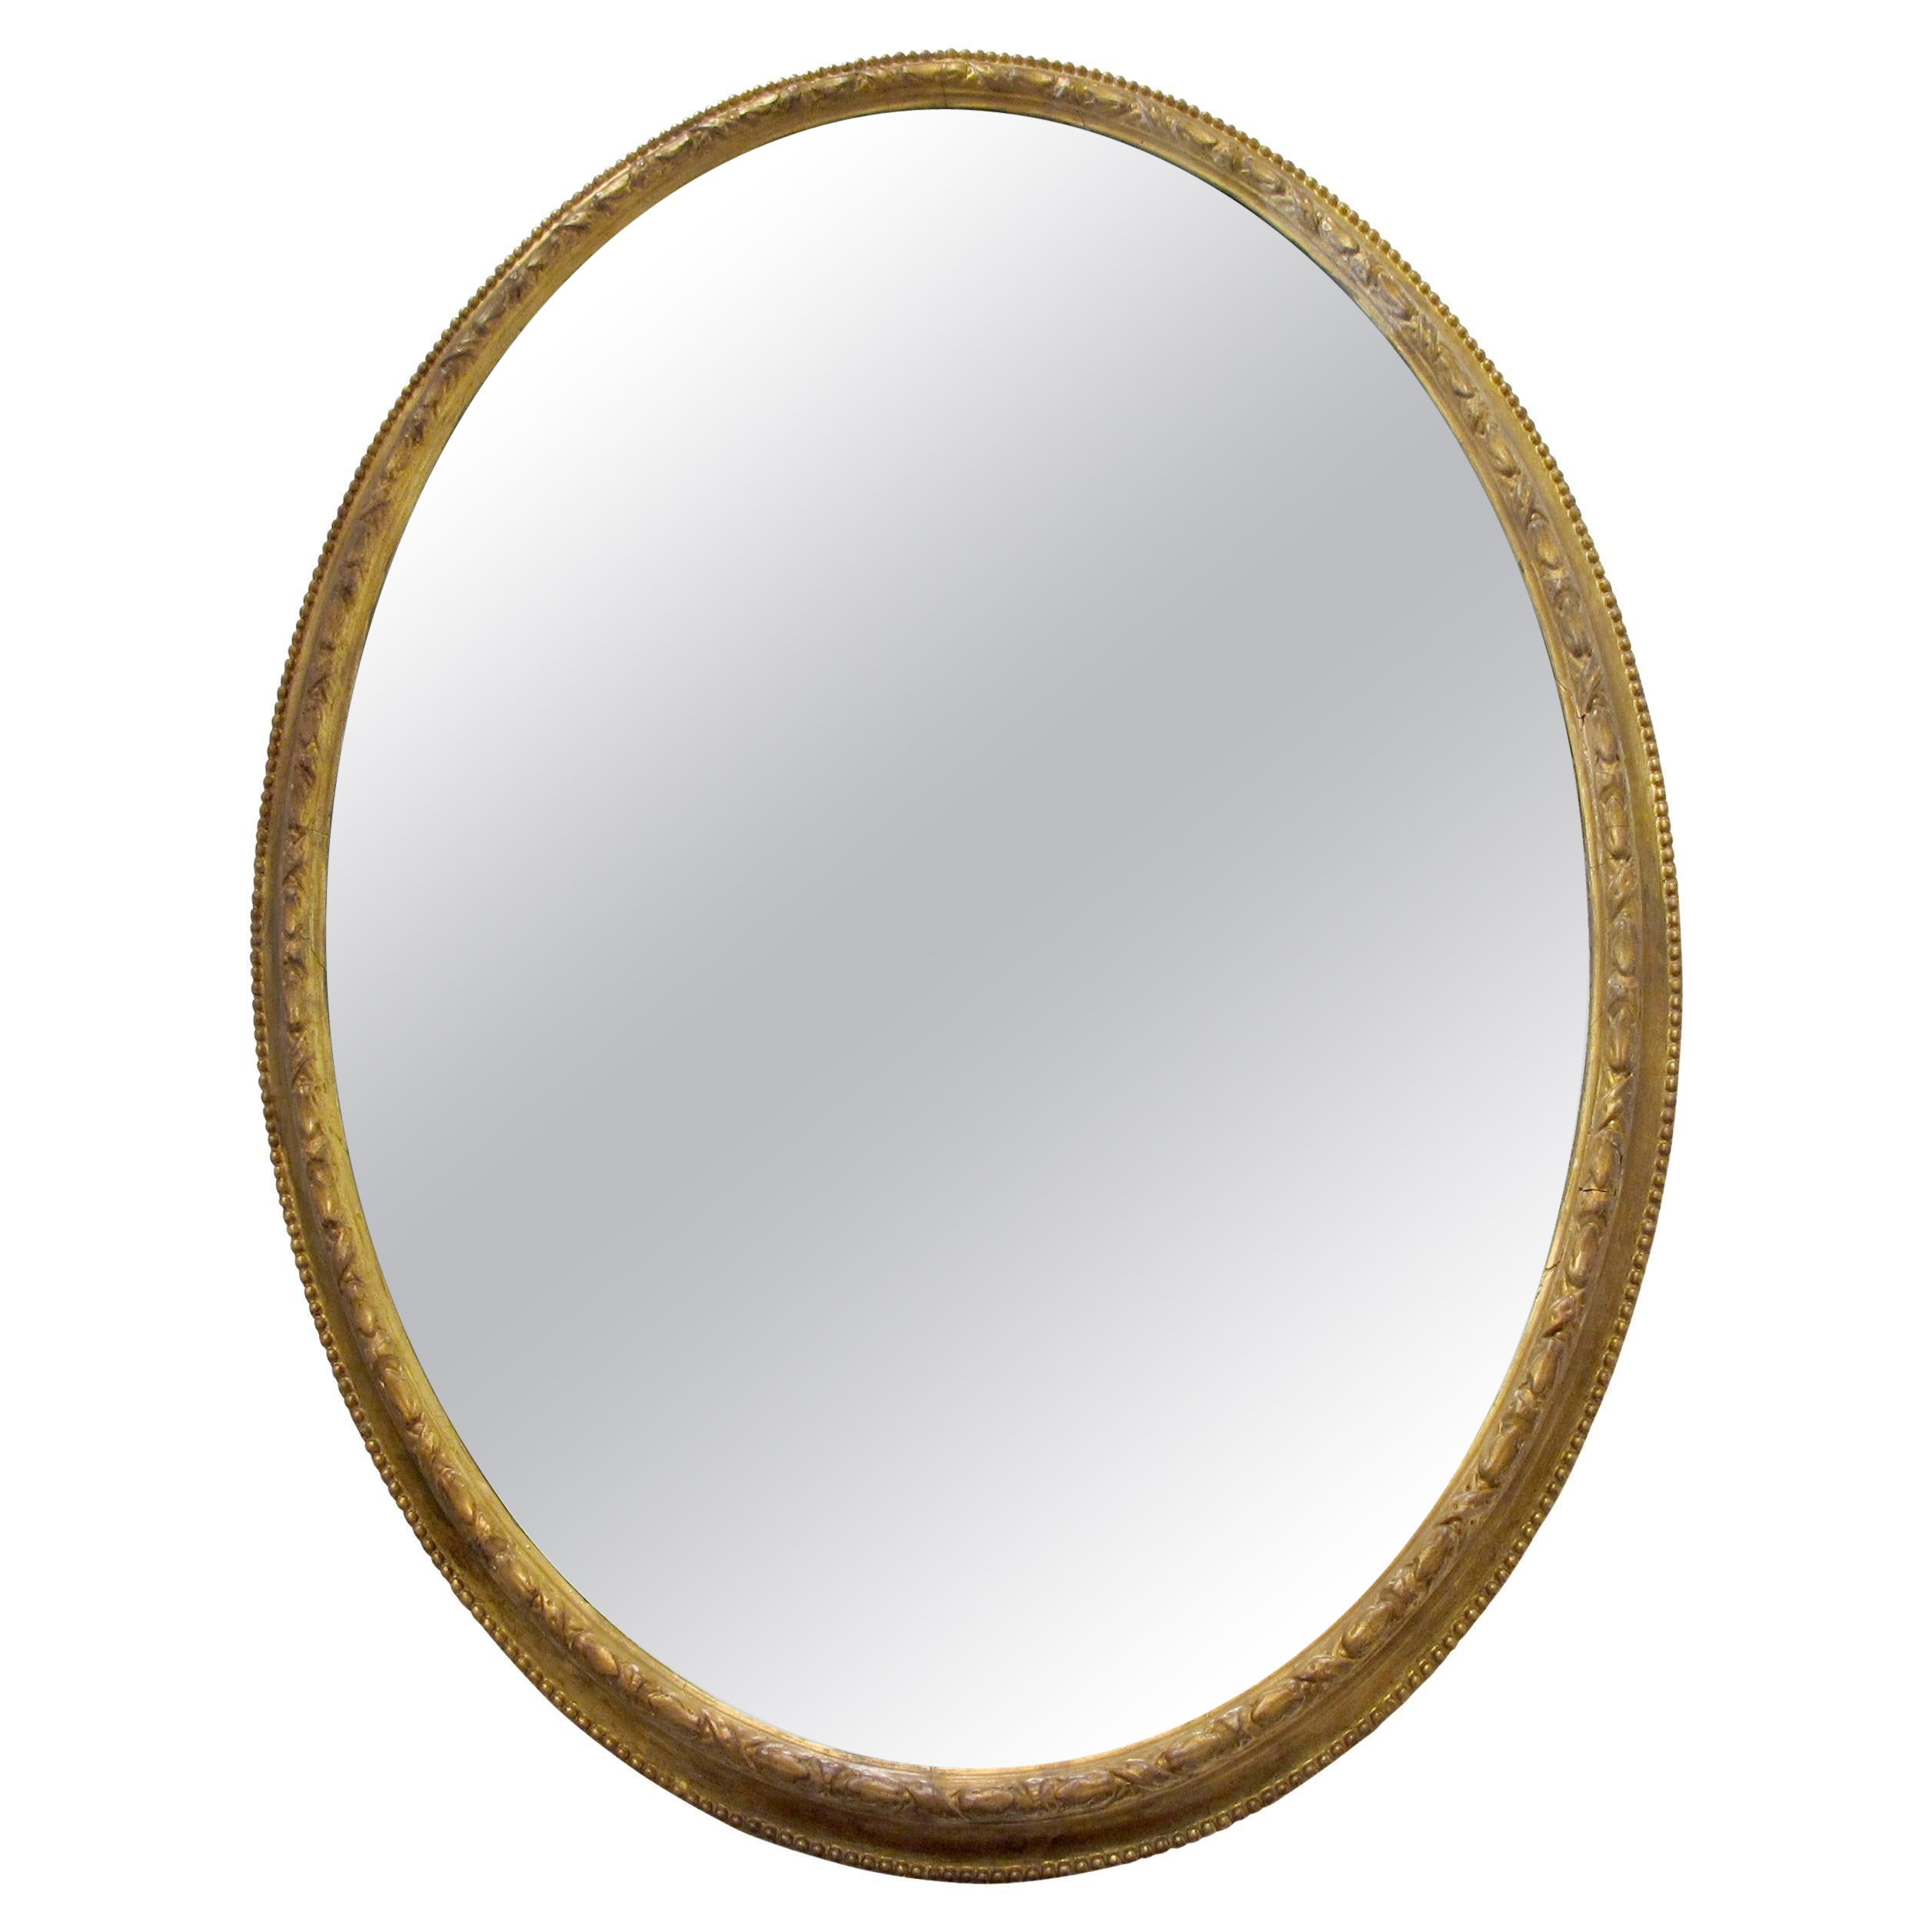 1790s Georgian Large Oval Mirror with Gilt Wood Frame, English  For Sale